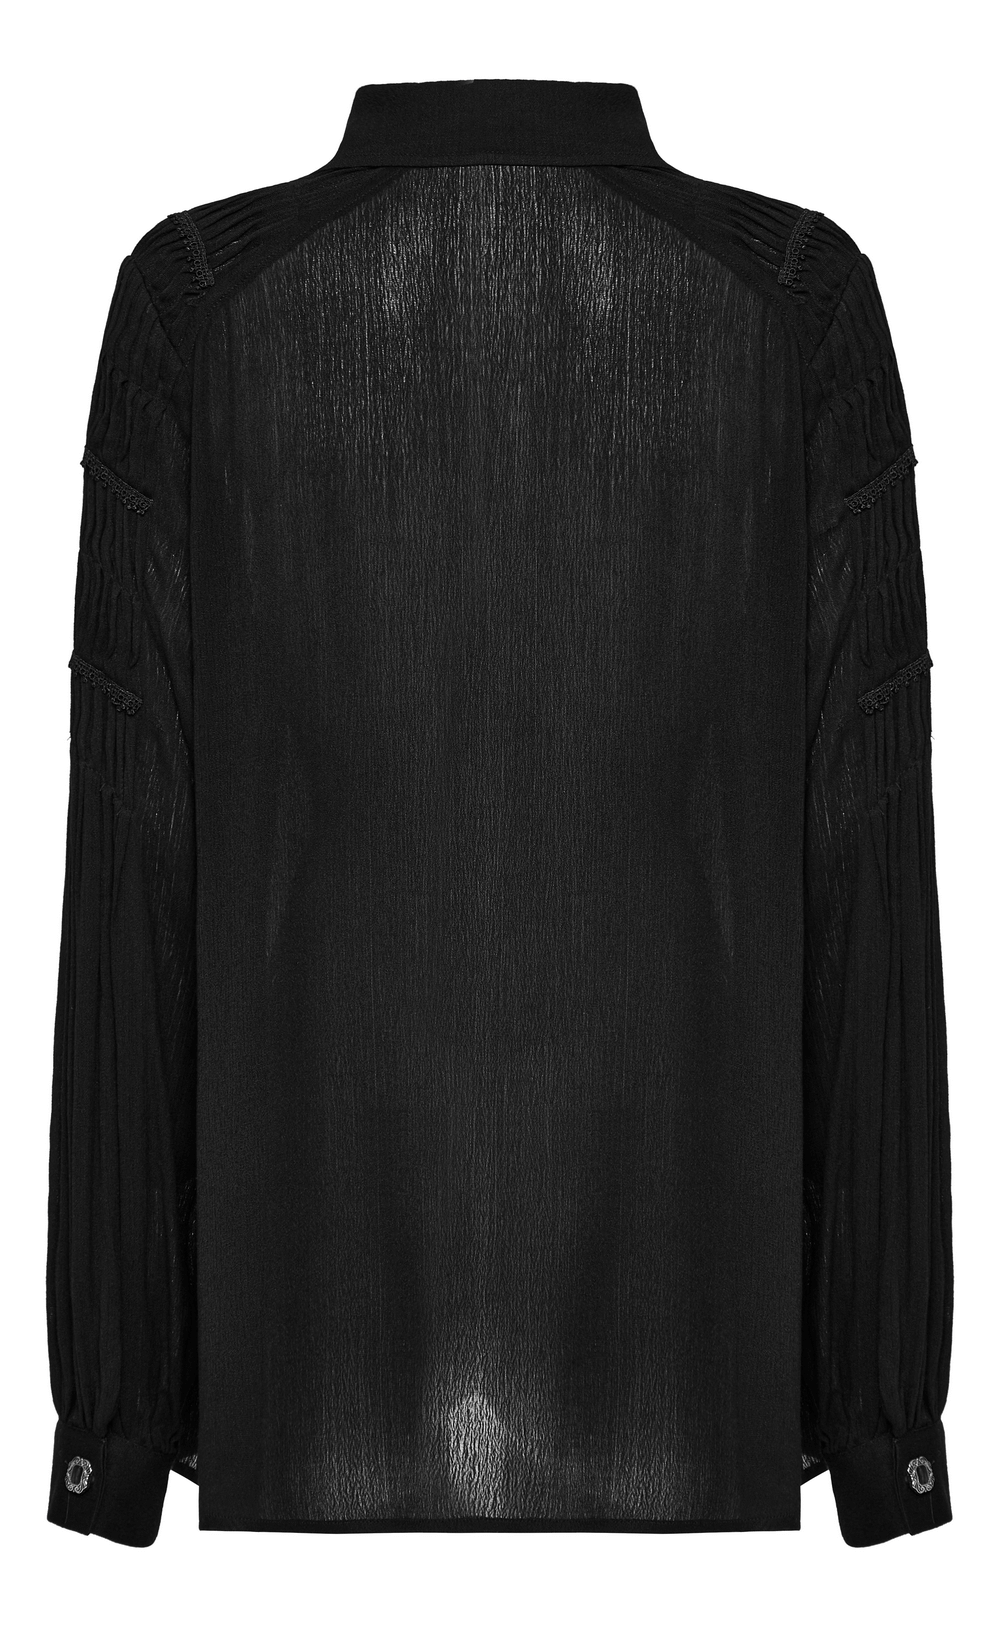 Lace-Up Gothic Blouse with Pleated Sleeves - HARD'N'HEAVY